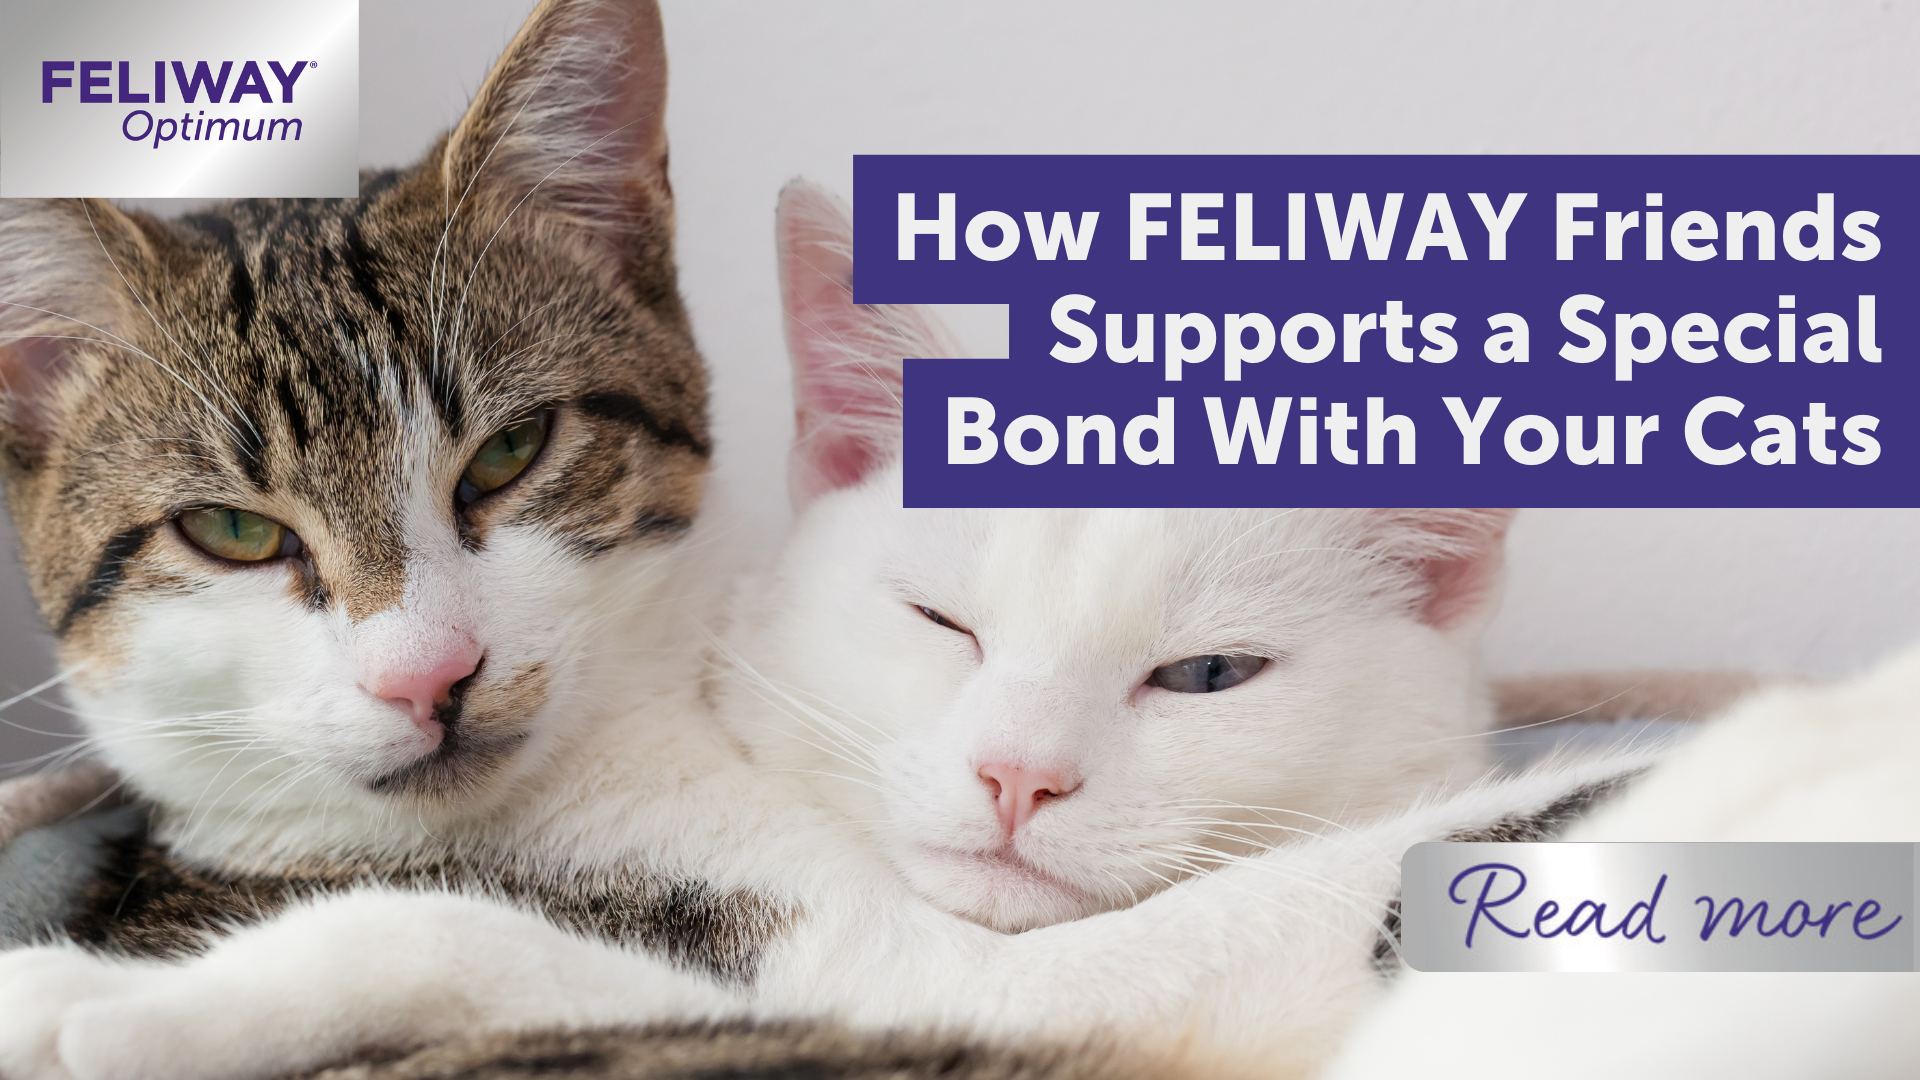 How FELIWAY Friends Supports a Special Bond With Your Cats